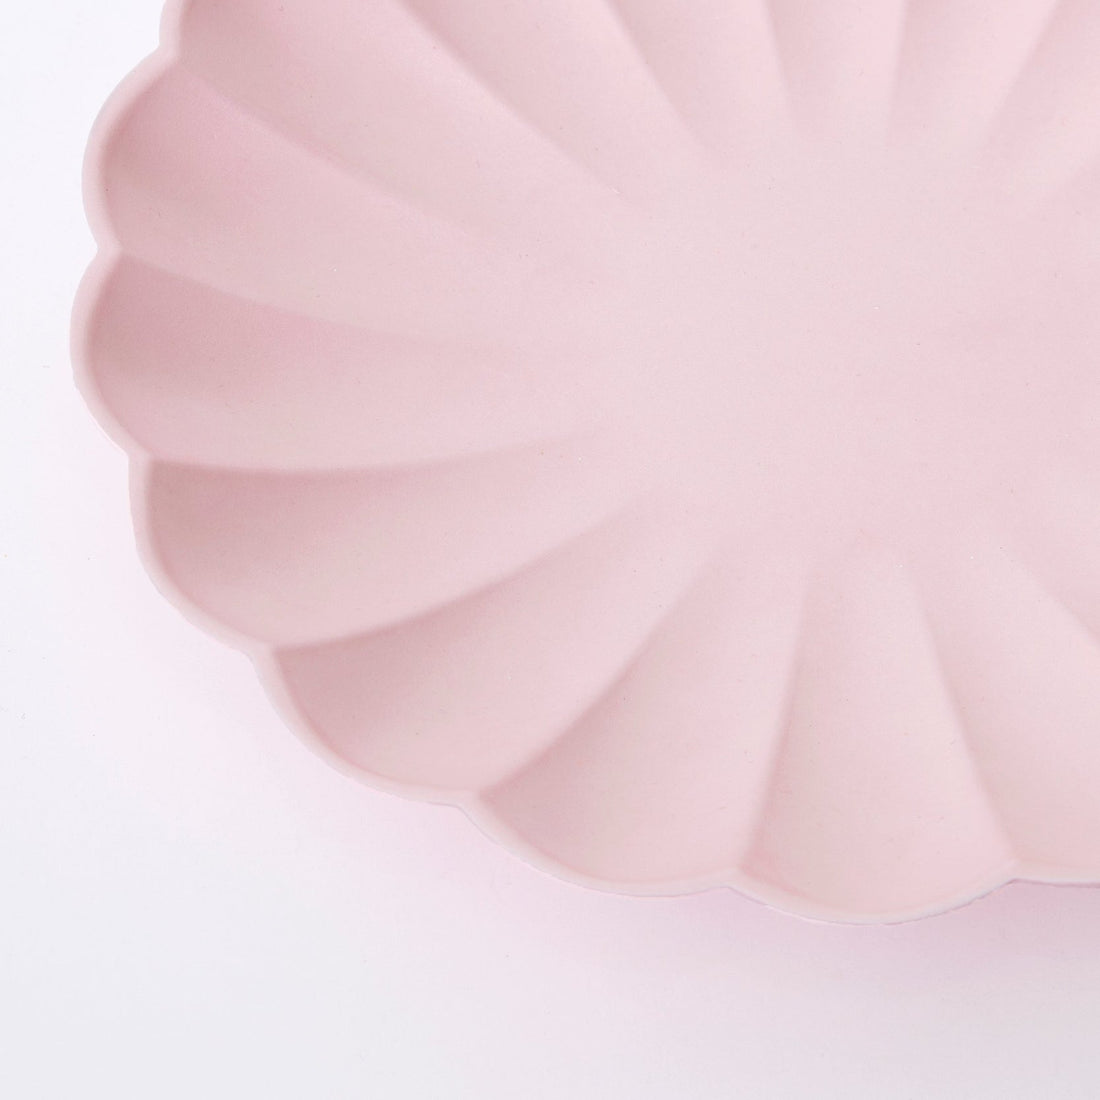 A Meri Meri Pale Pink Eco Plate in the shape of a flower on a white background.